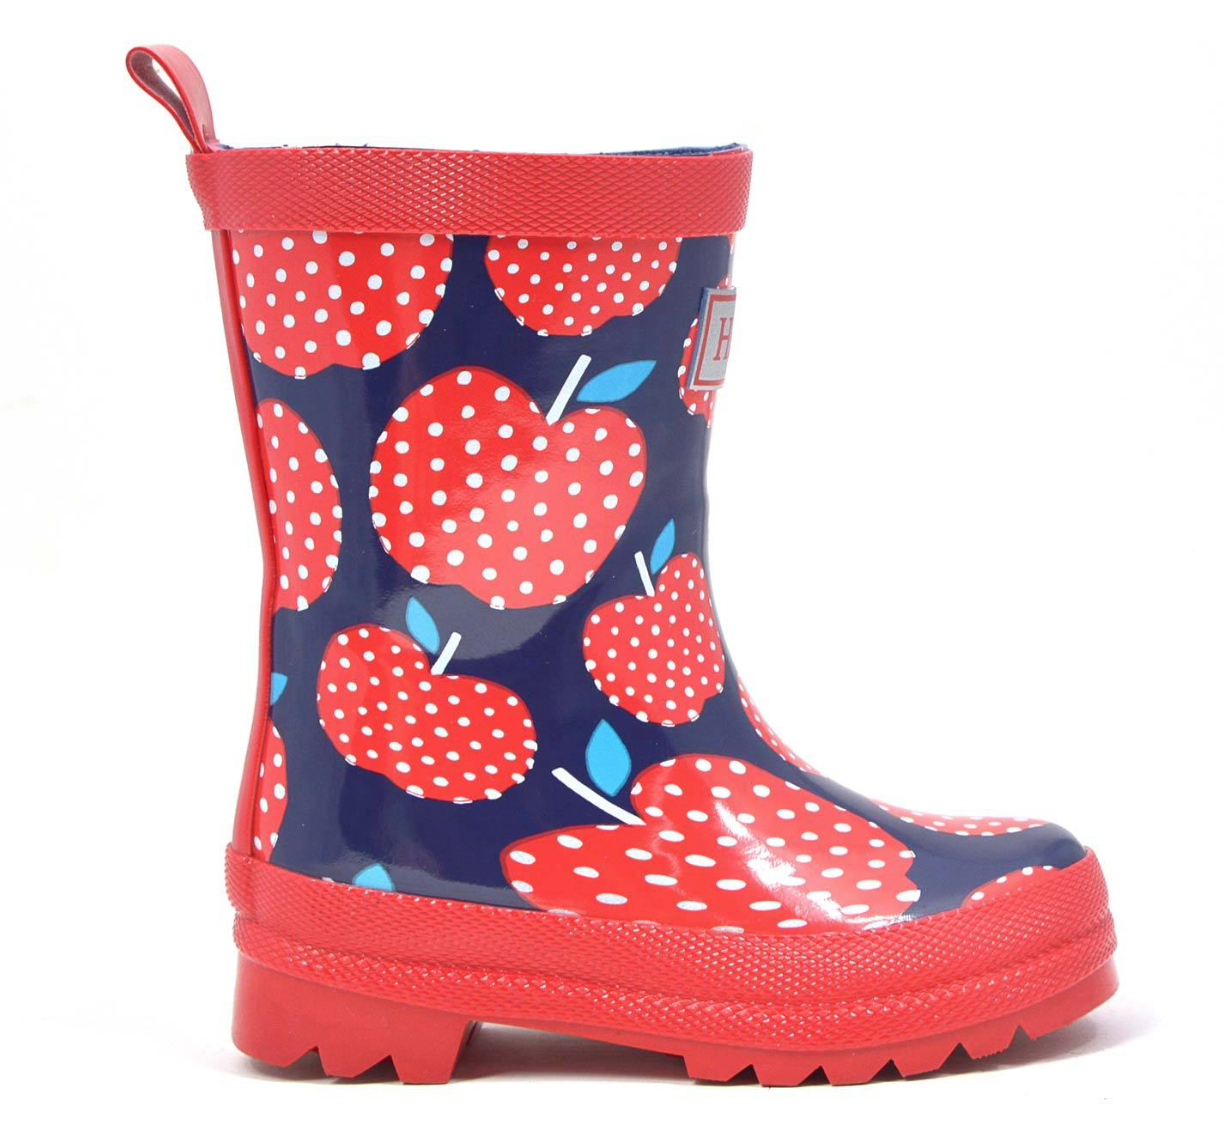 2020's cutest gumboots for puddle-loving toddlers and preschoolers